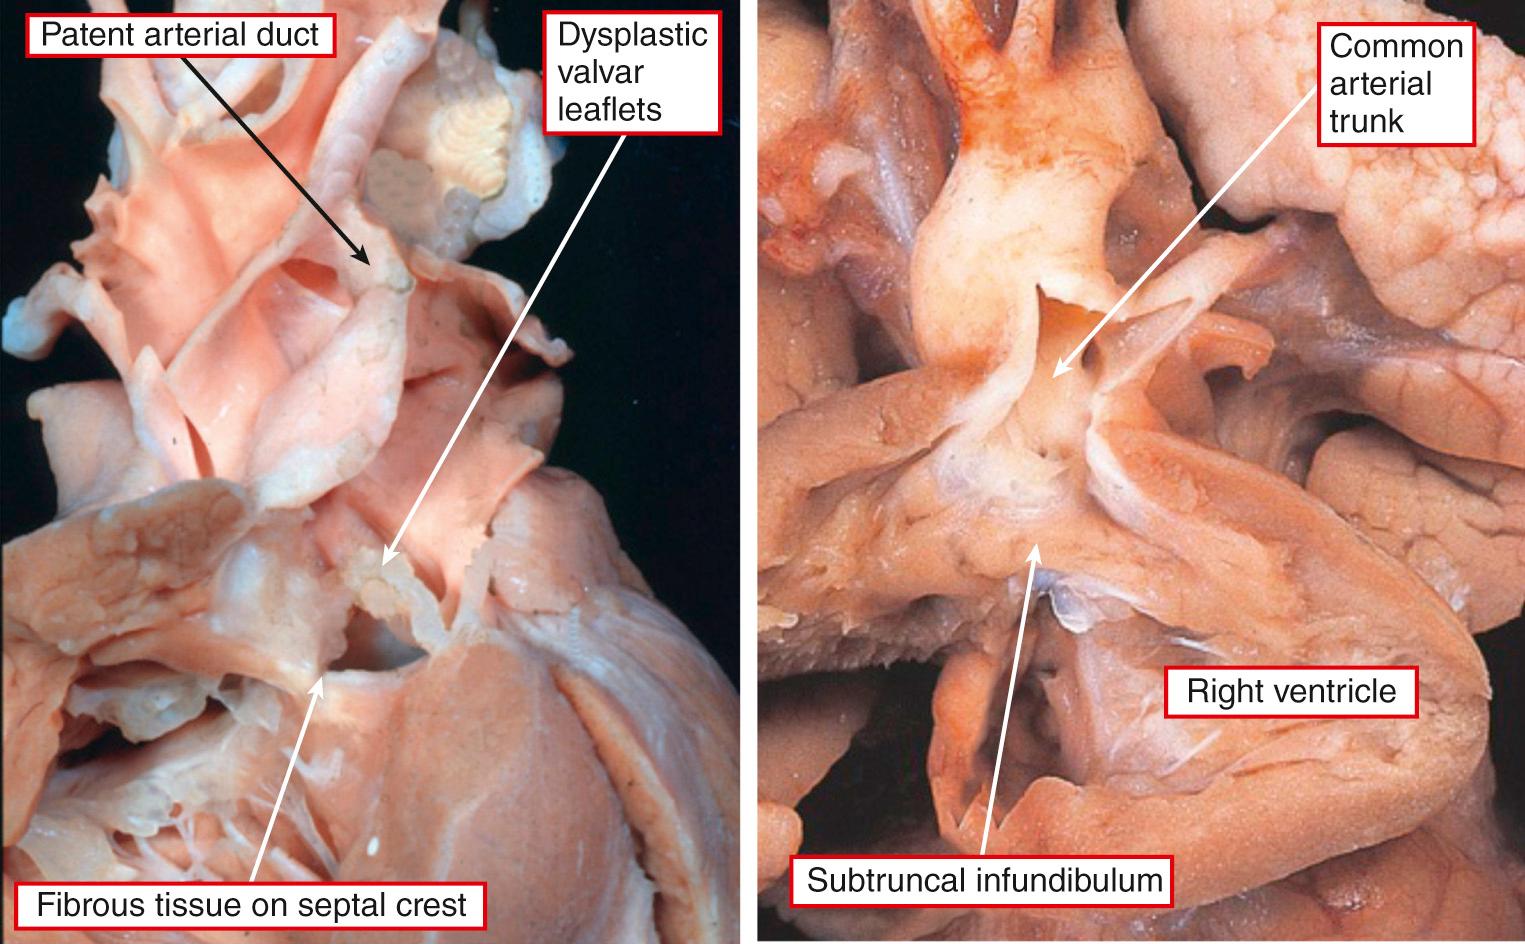 Fig. 40.5, Left, Dysplastic leaflets of the common truncal valve closed on the crest of the ventricular septum during ventricular diastole; the crest itself is thickened by fibrous tissue. However, an interventricular communication remains during ventricular systole. Note the persistently patent arterial duct. This heart has a balanced arrangement of the intrapericardial components of the aorta and the pulmonary trunk. Right, In contrast, this trunk arises exclusively from the right ventricle, and the ventricular septum is intact. This heart has aortic dominance but with a confluent pulmonary arterial segment.